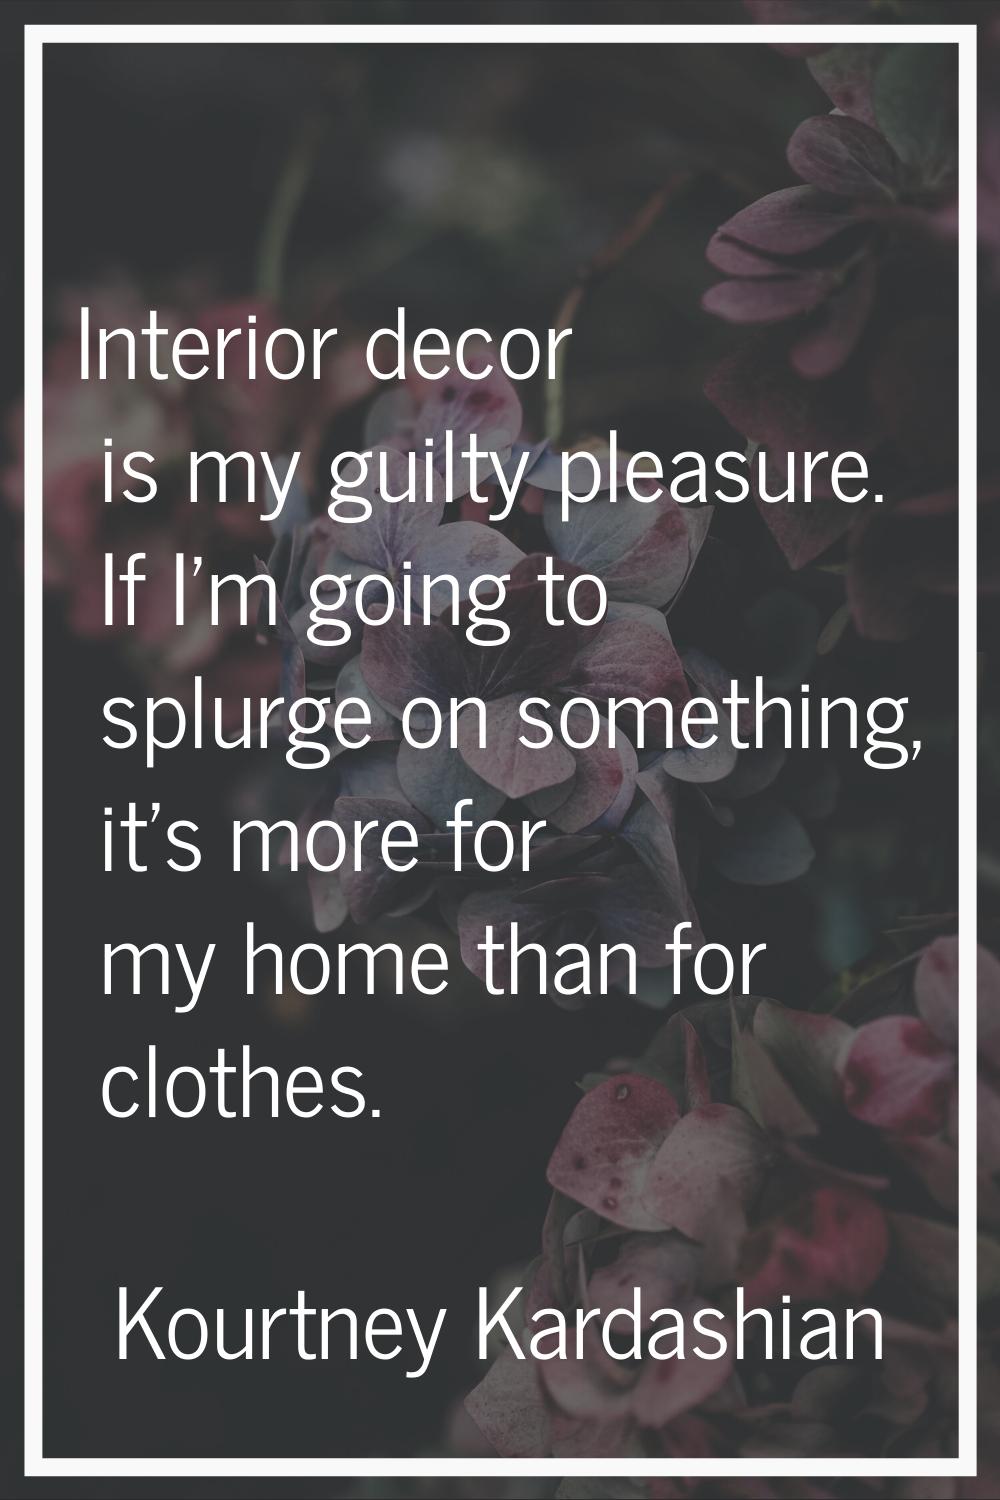 Interior decor is my guilty pleasure. If I'm going to splurge on something, it's more for my home t